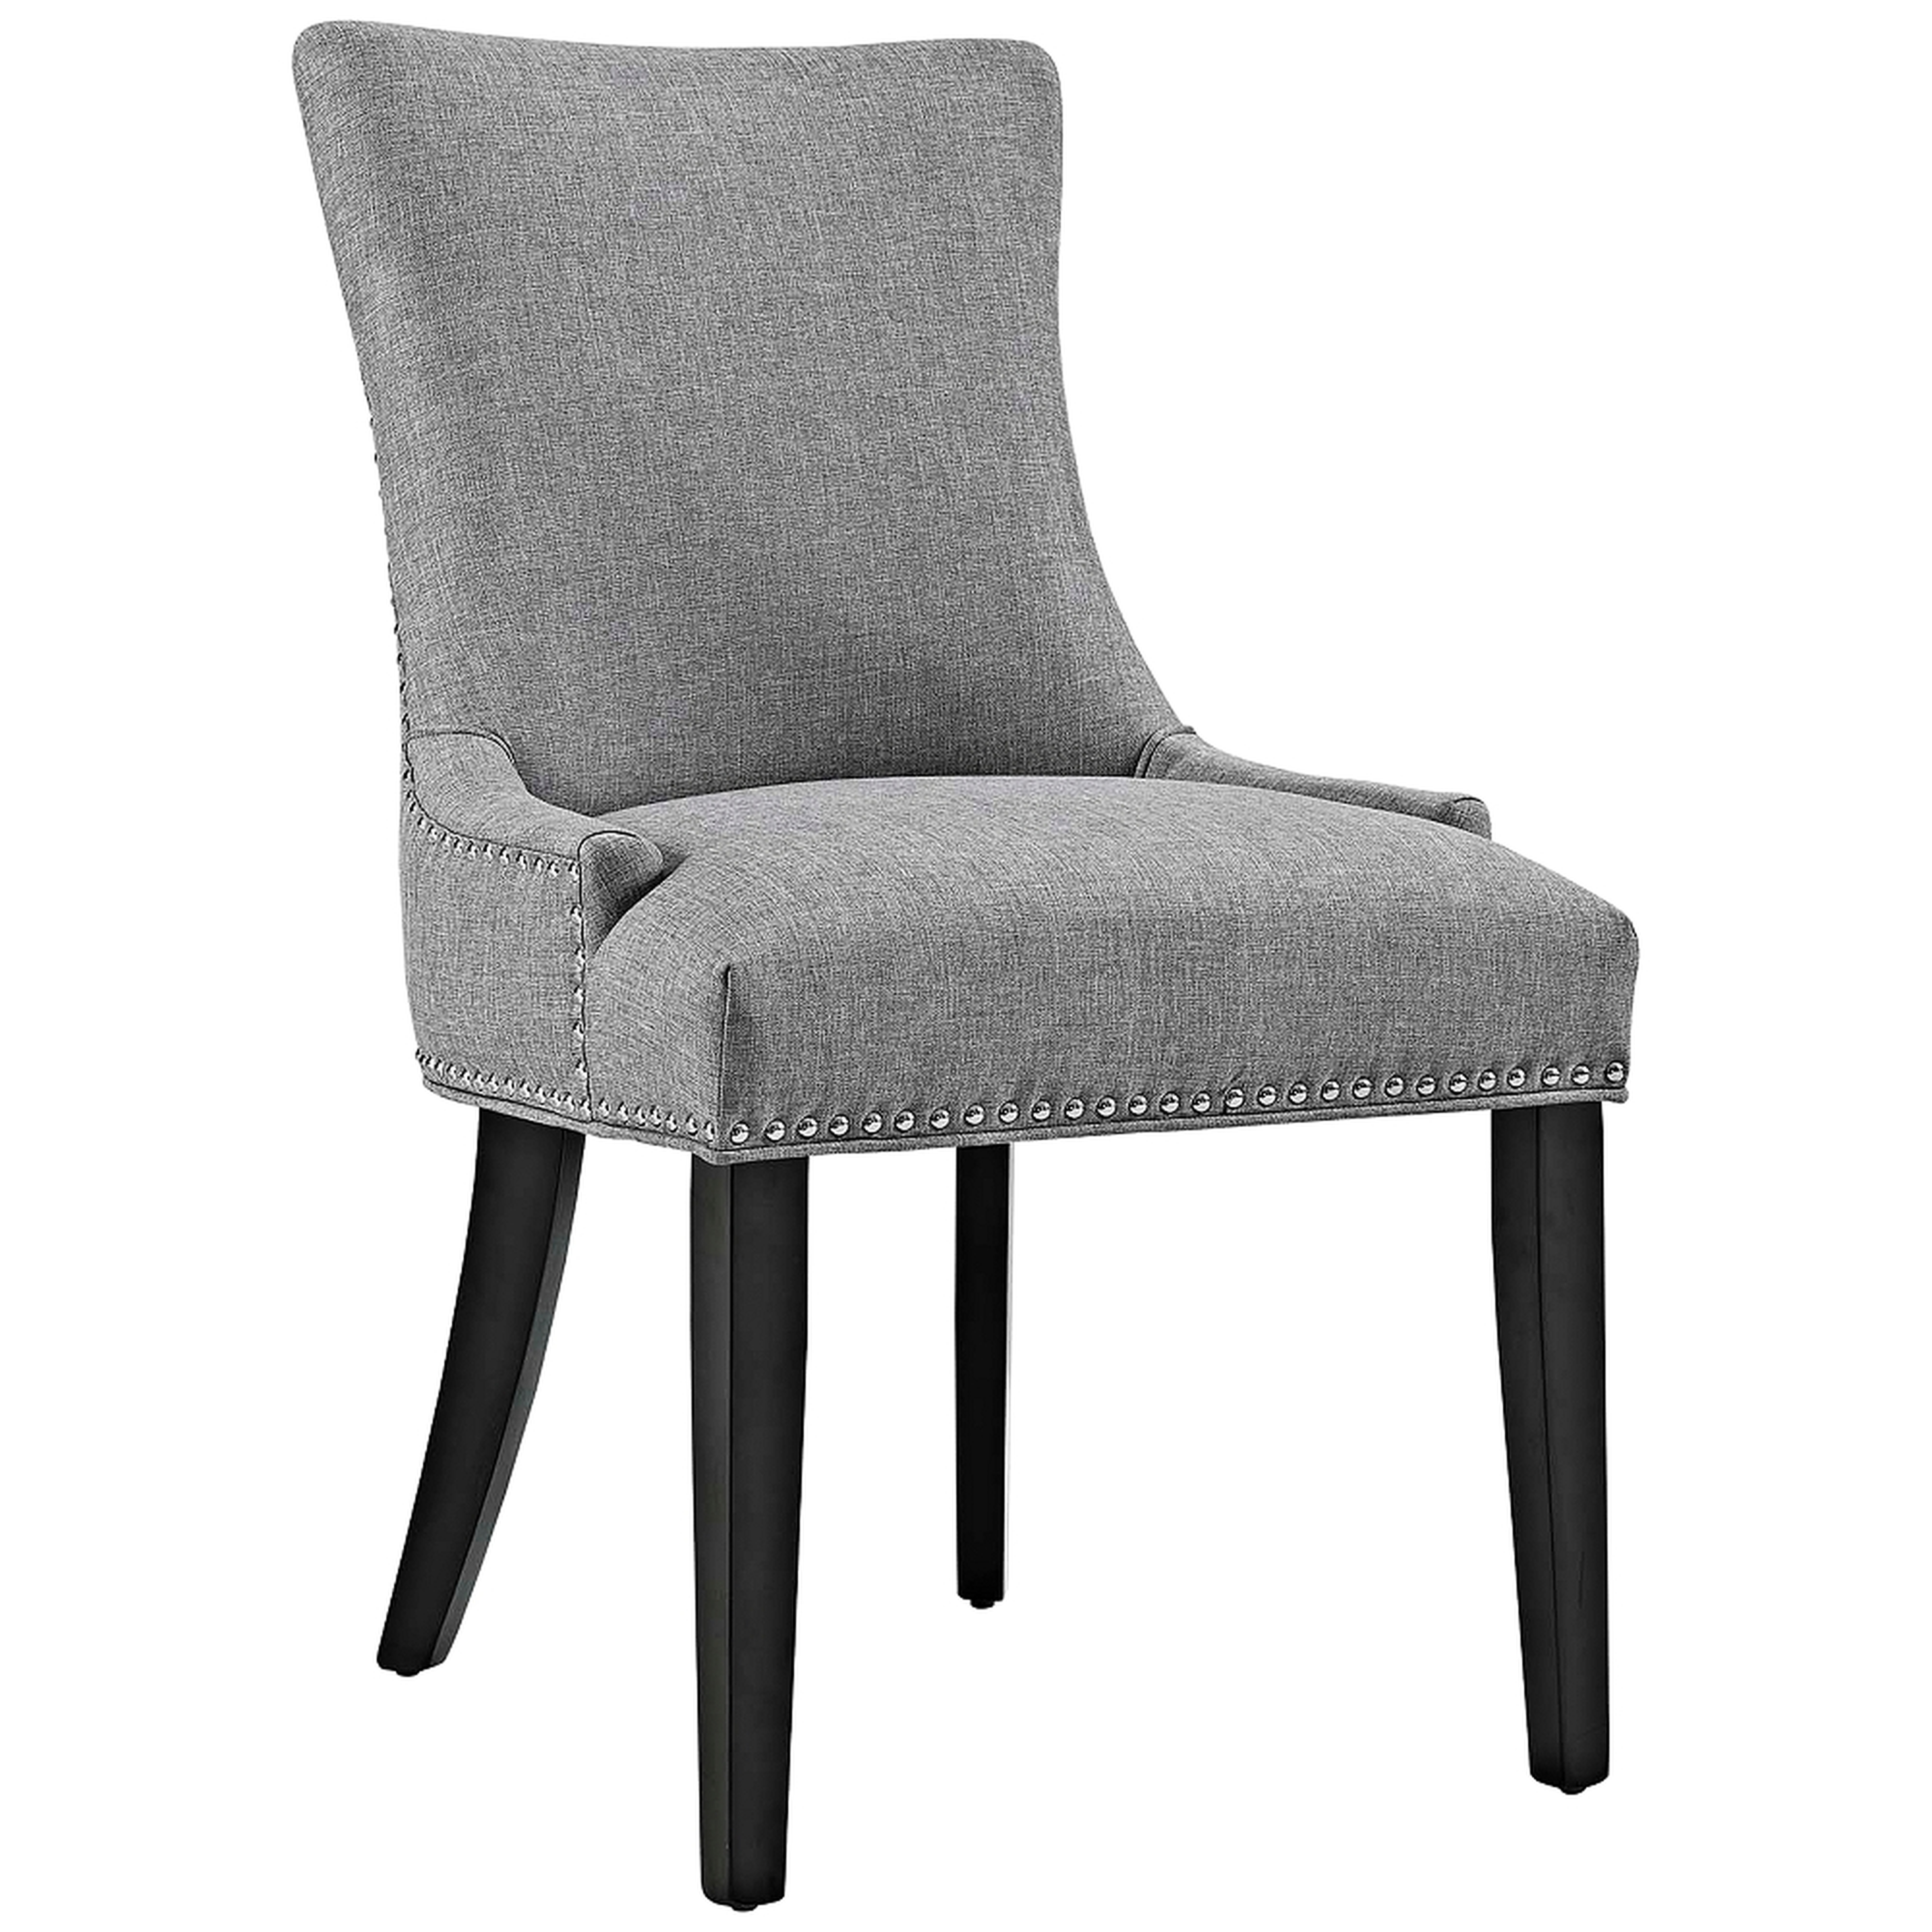 Marquis Light Gray Fabric Dining Chair - Style # 33T48 - Lamps Plus